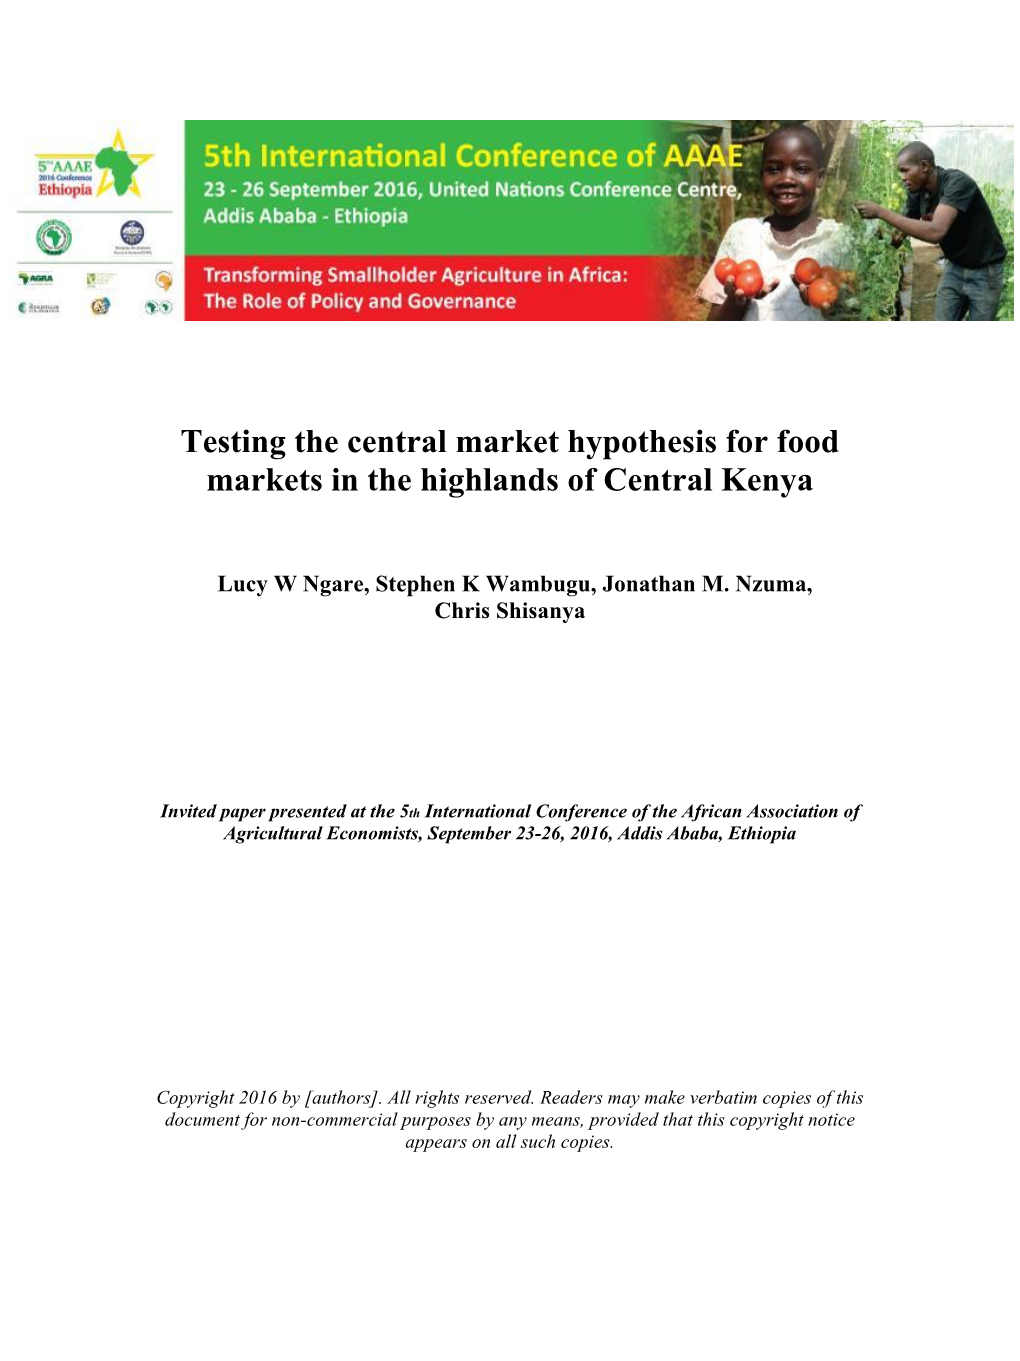 Testing the Central Market Hypothesis for Food Markets in the Highlands of Central Kenya